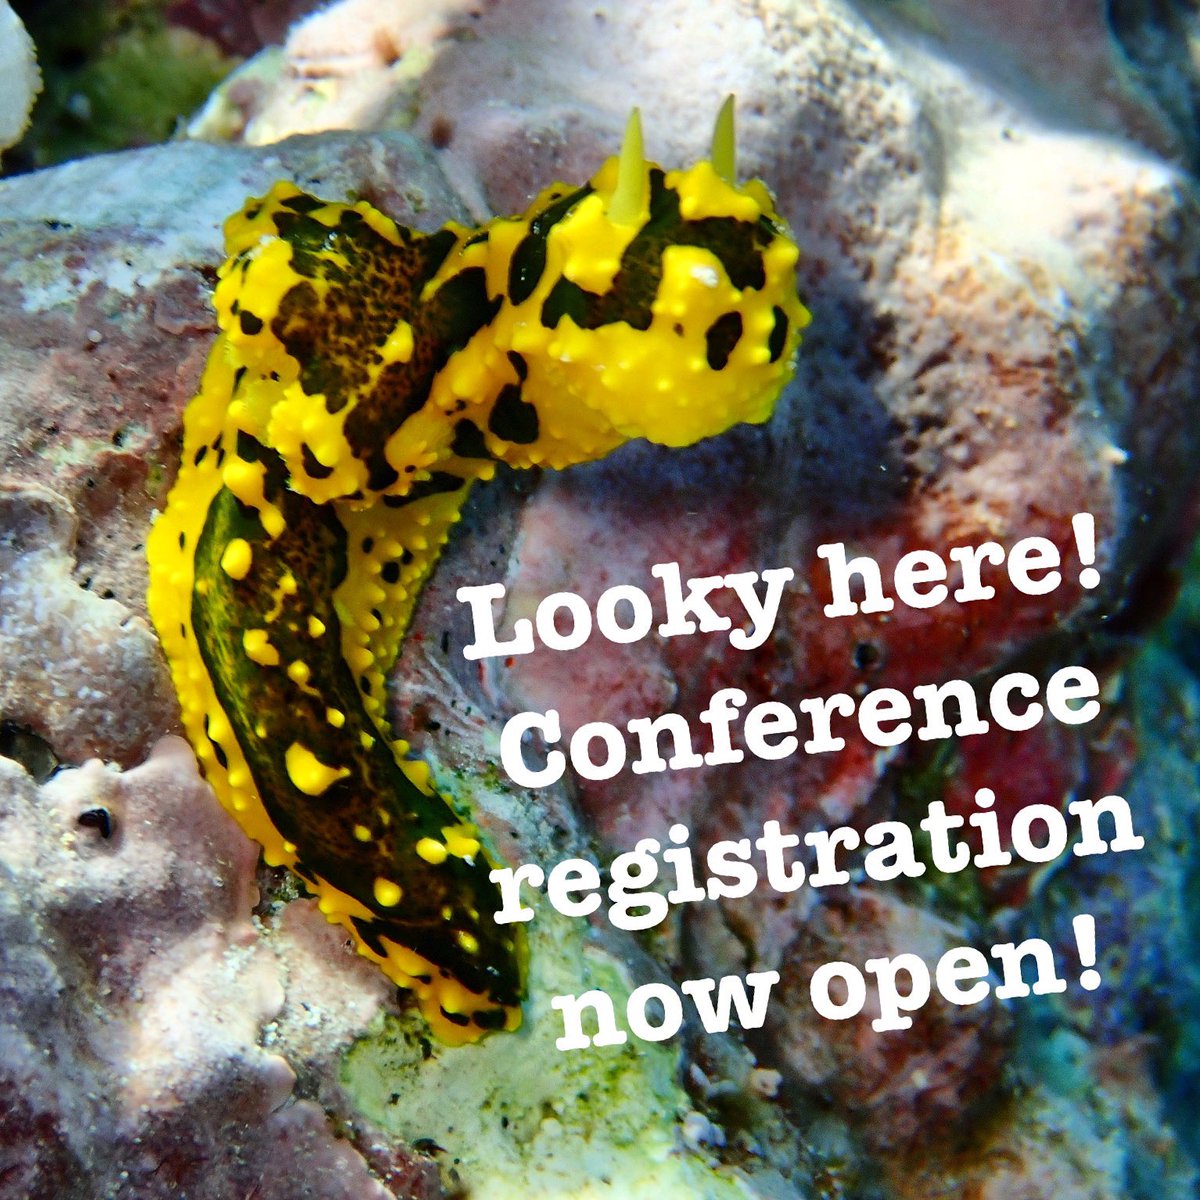 👀 Conference registration is NOW OPEN! 👀 There are 2 workshops & 3 museum tours on May 6. Get in quick as spots are limited! Check out preliminary agenda and accomm options on website! And keep your eyes peeled for abstract outcomes coming this week! 👀 📸 @TaniaKenyon